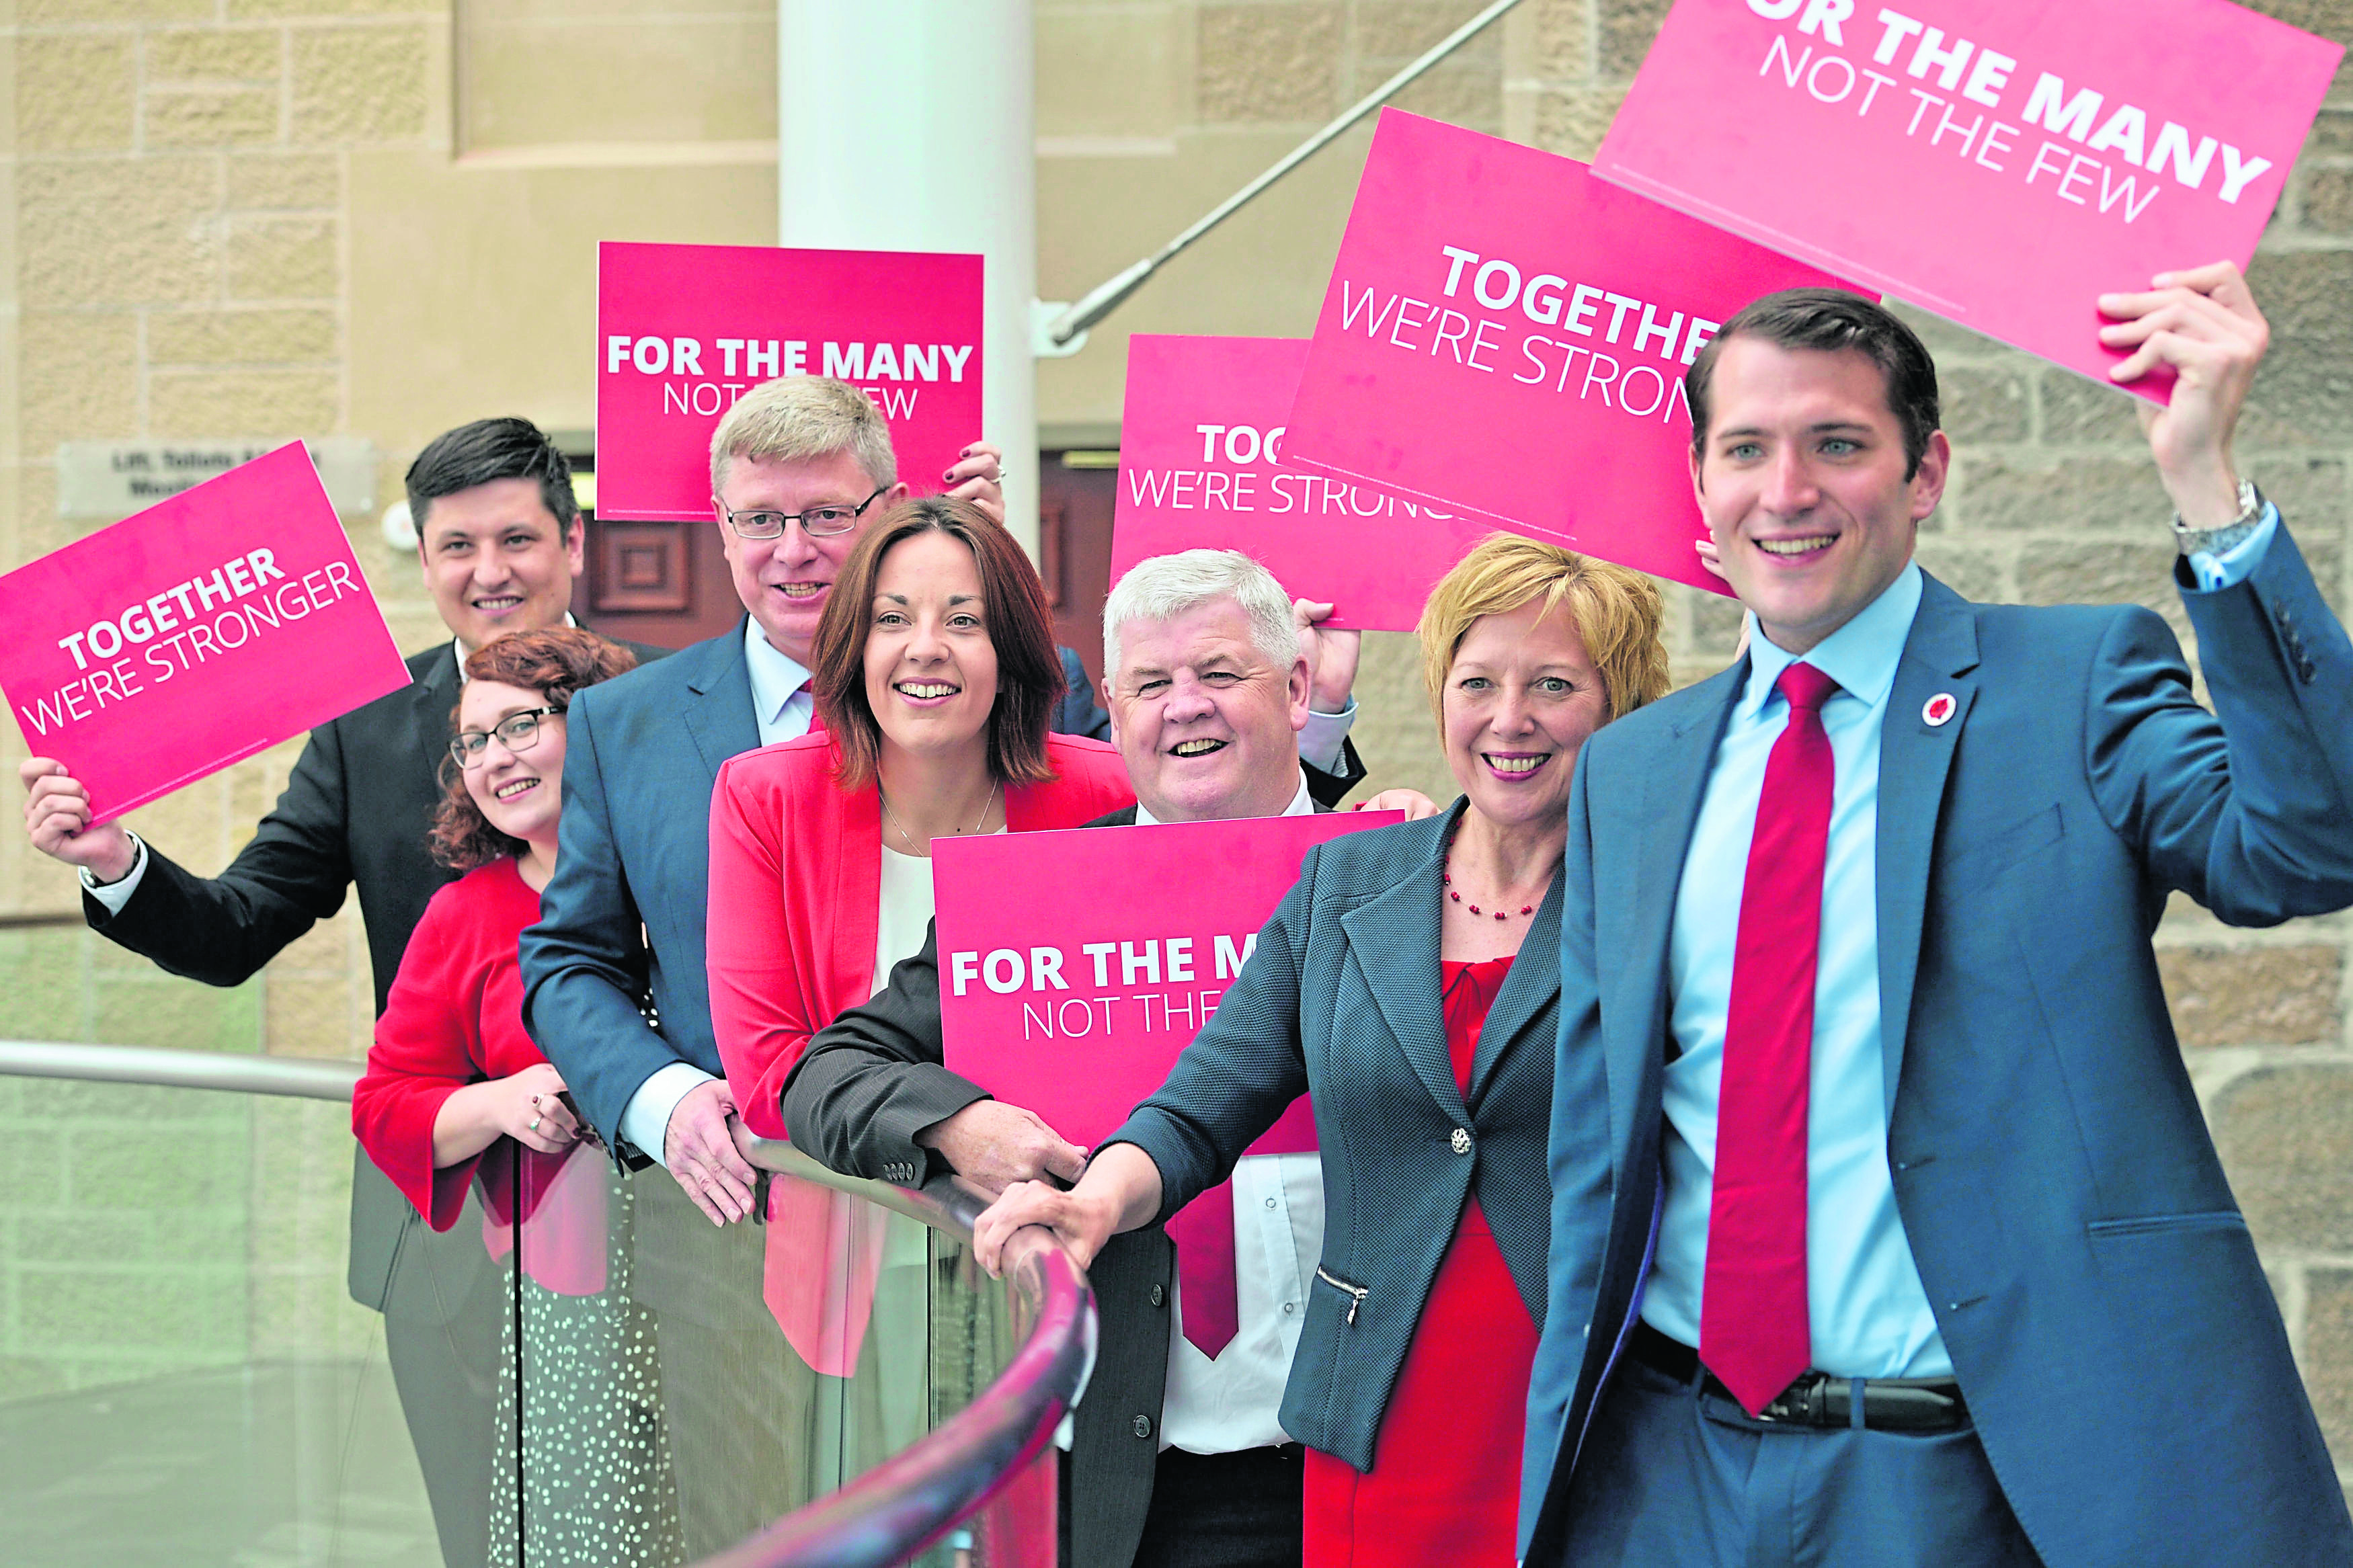 Scottish Labour MPs elected in 2017 (left to right) Ged Killen, Danielle Rowley, Martin Whitfield, Scottish Labour leader Kezia Dugdale, Hugh Gaffney, Lesley Laird, Paul Sweeney